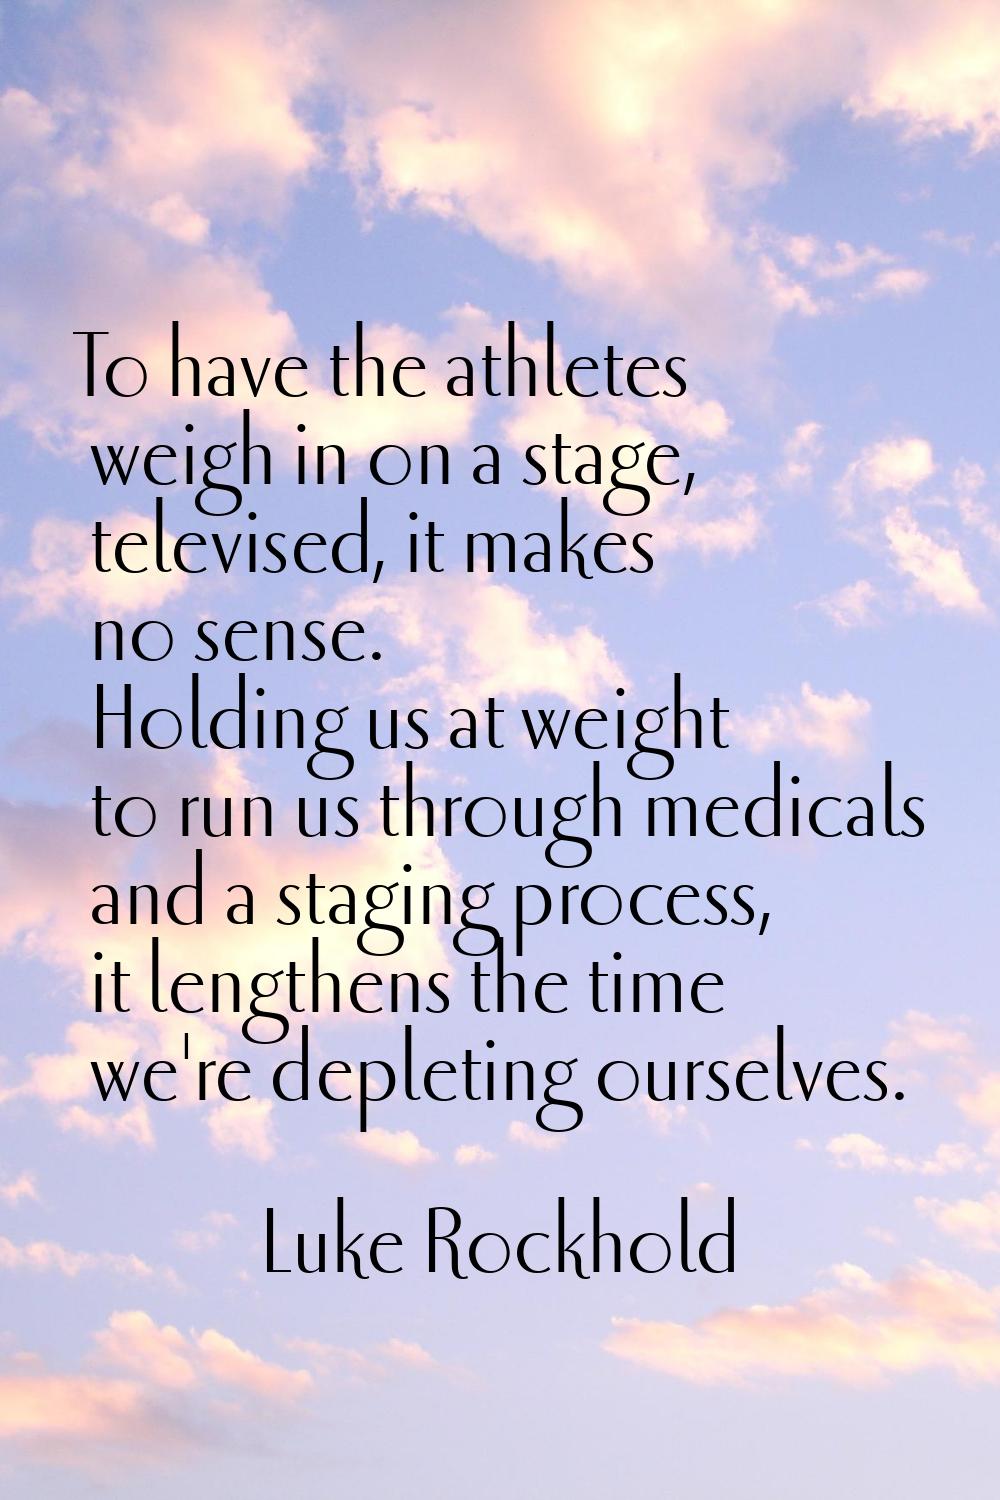 To have the athletes weigh in on a stage, televised, it makes no sense. Holding us at weight to run